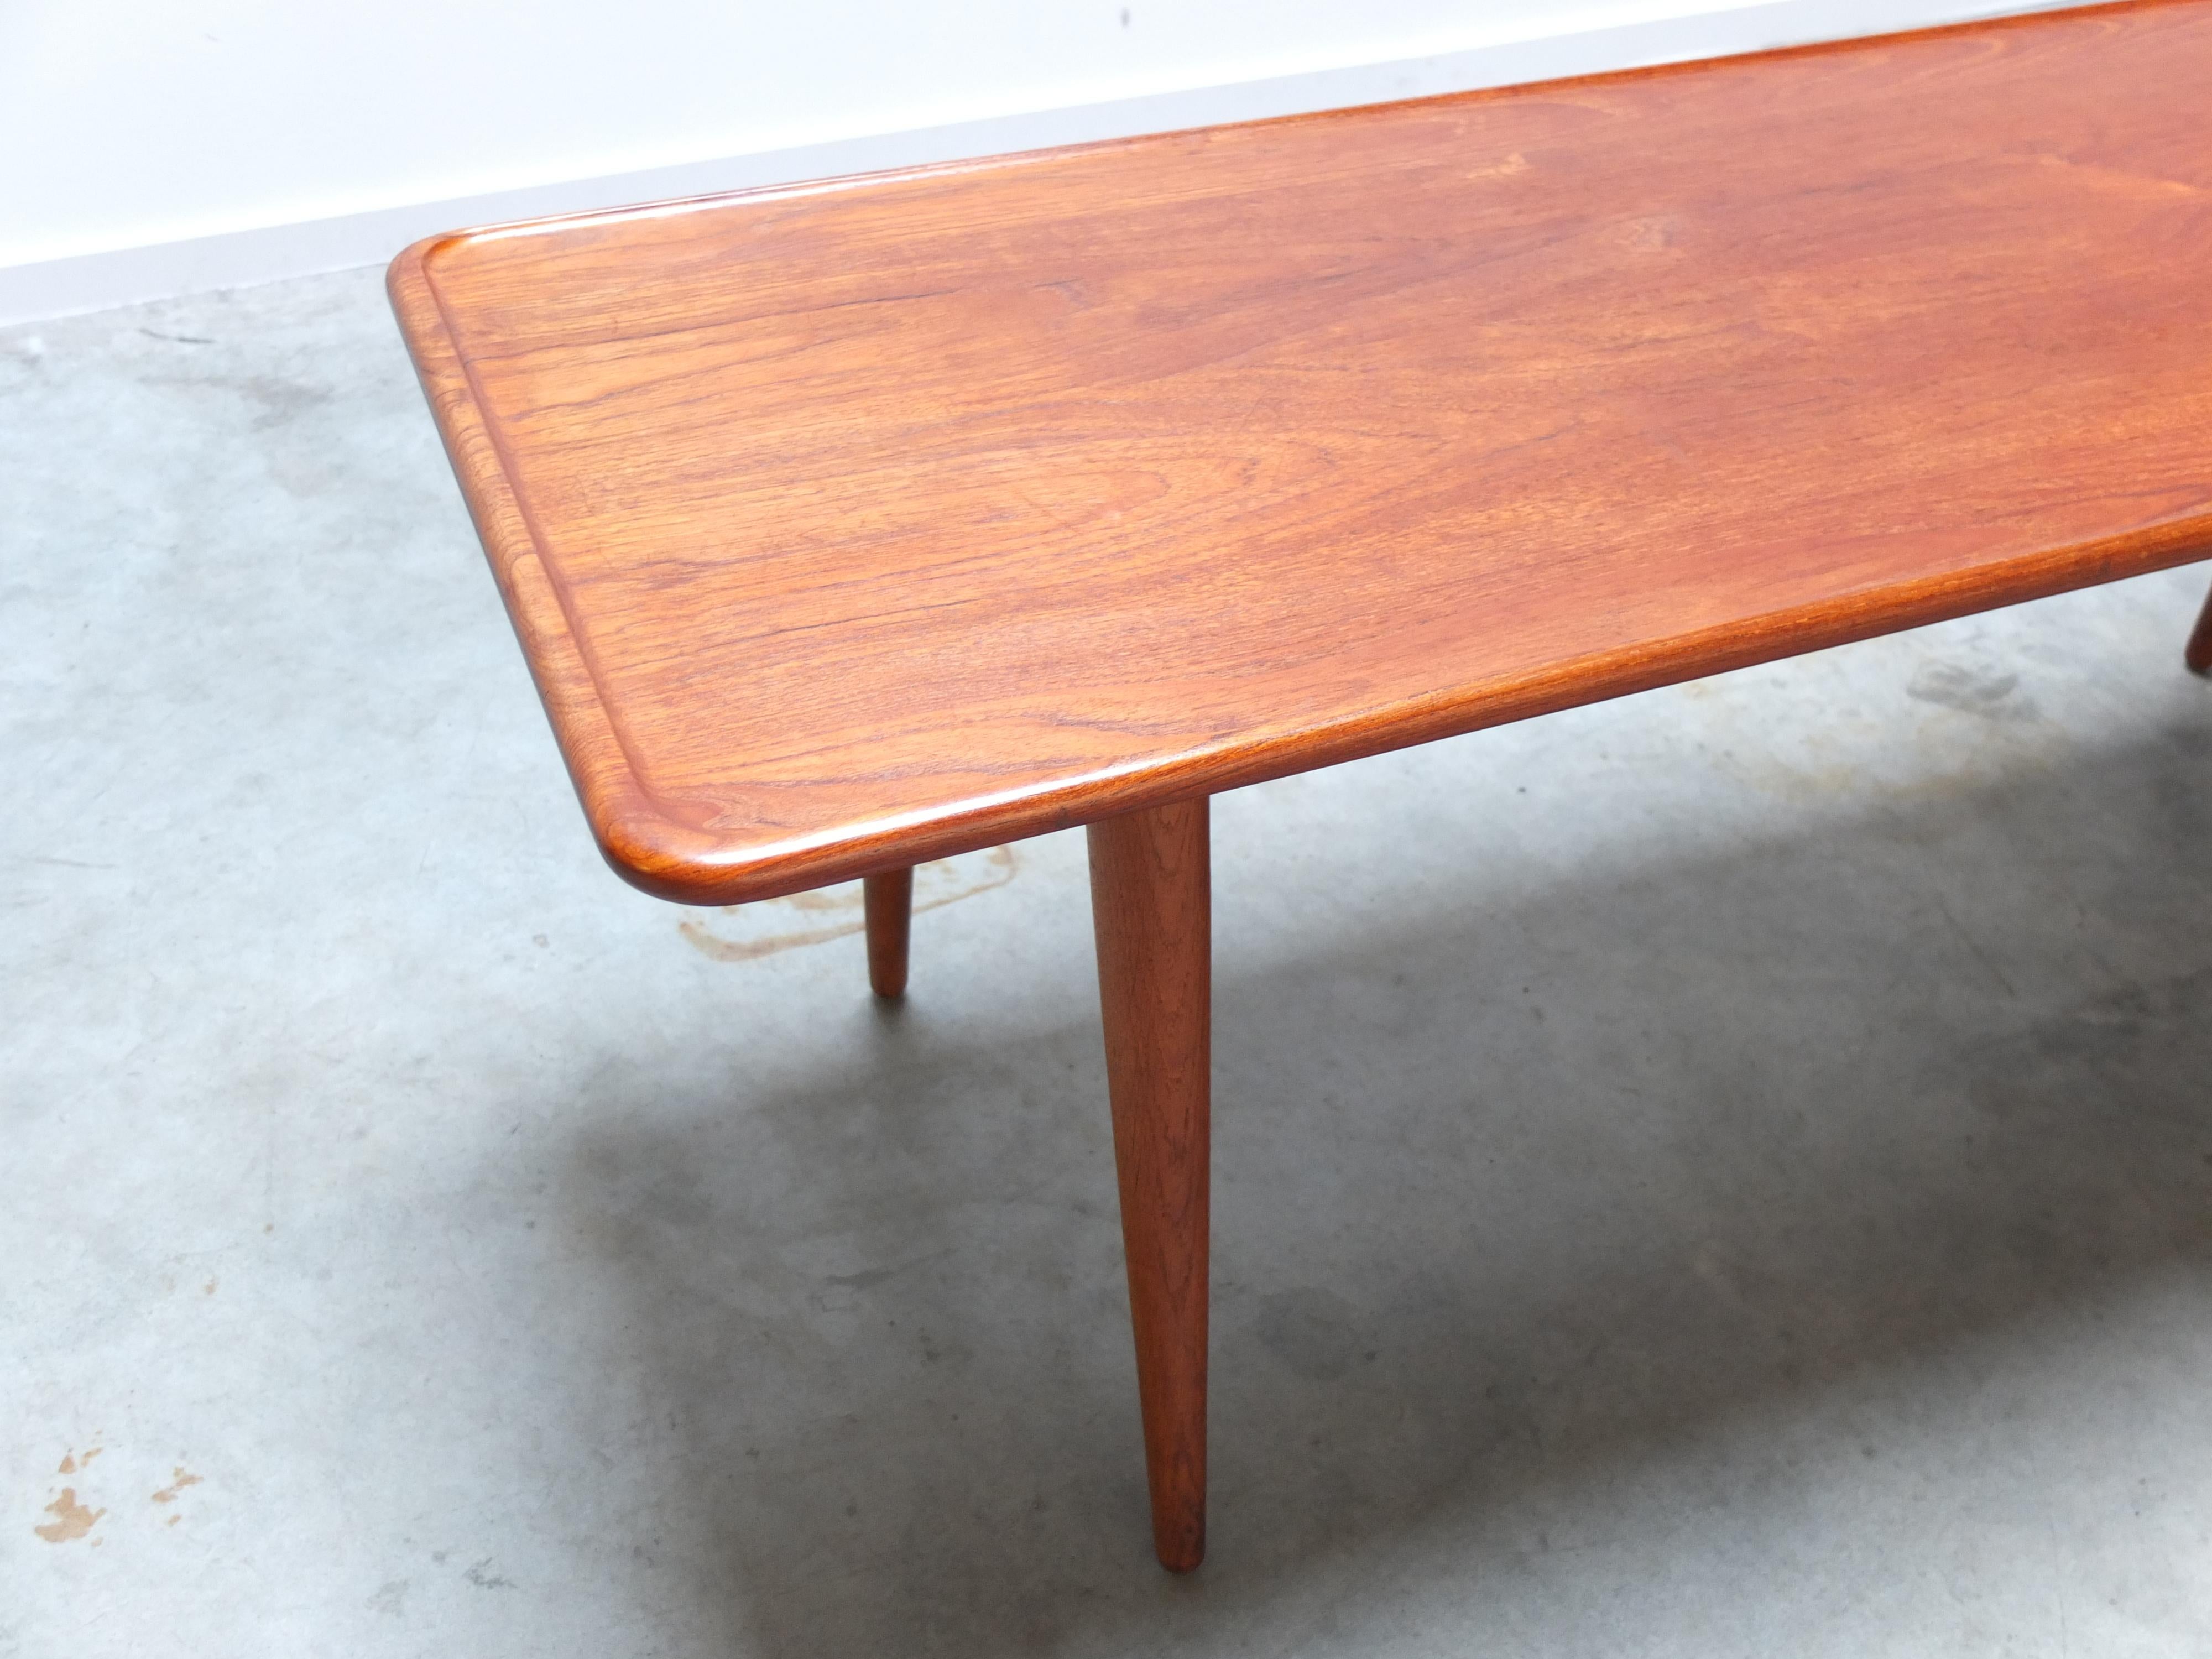 Teak & Oak 'At-11' Coffee Table by Hans Wegner for Andreas Tuck, 1950s For Sale 2